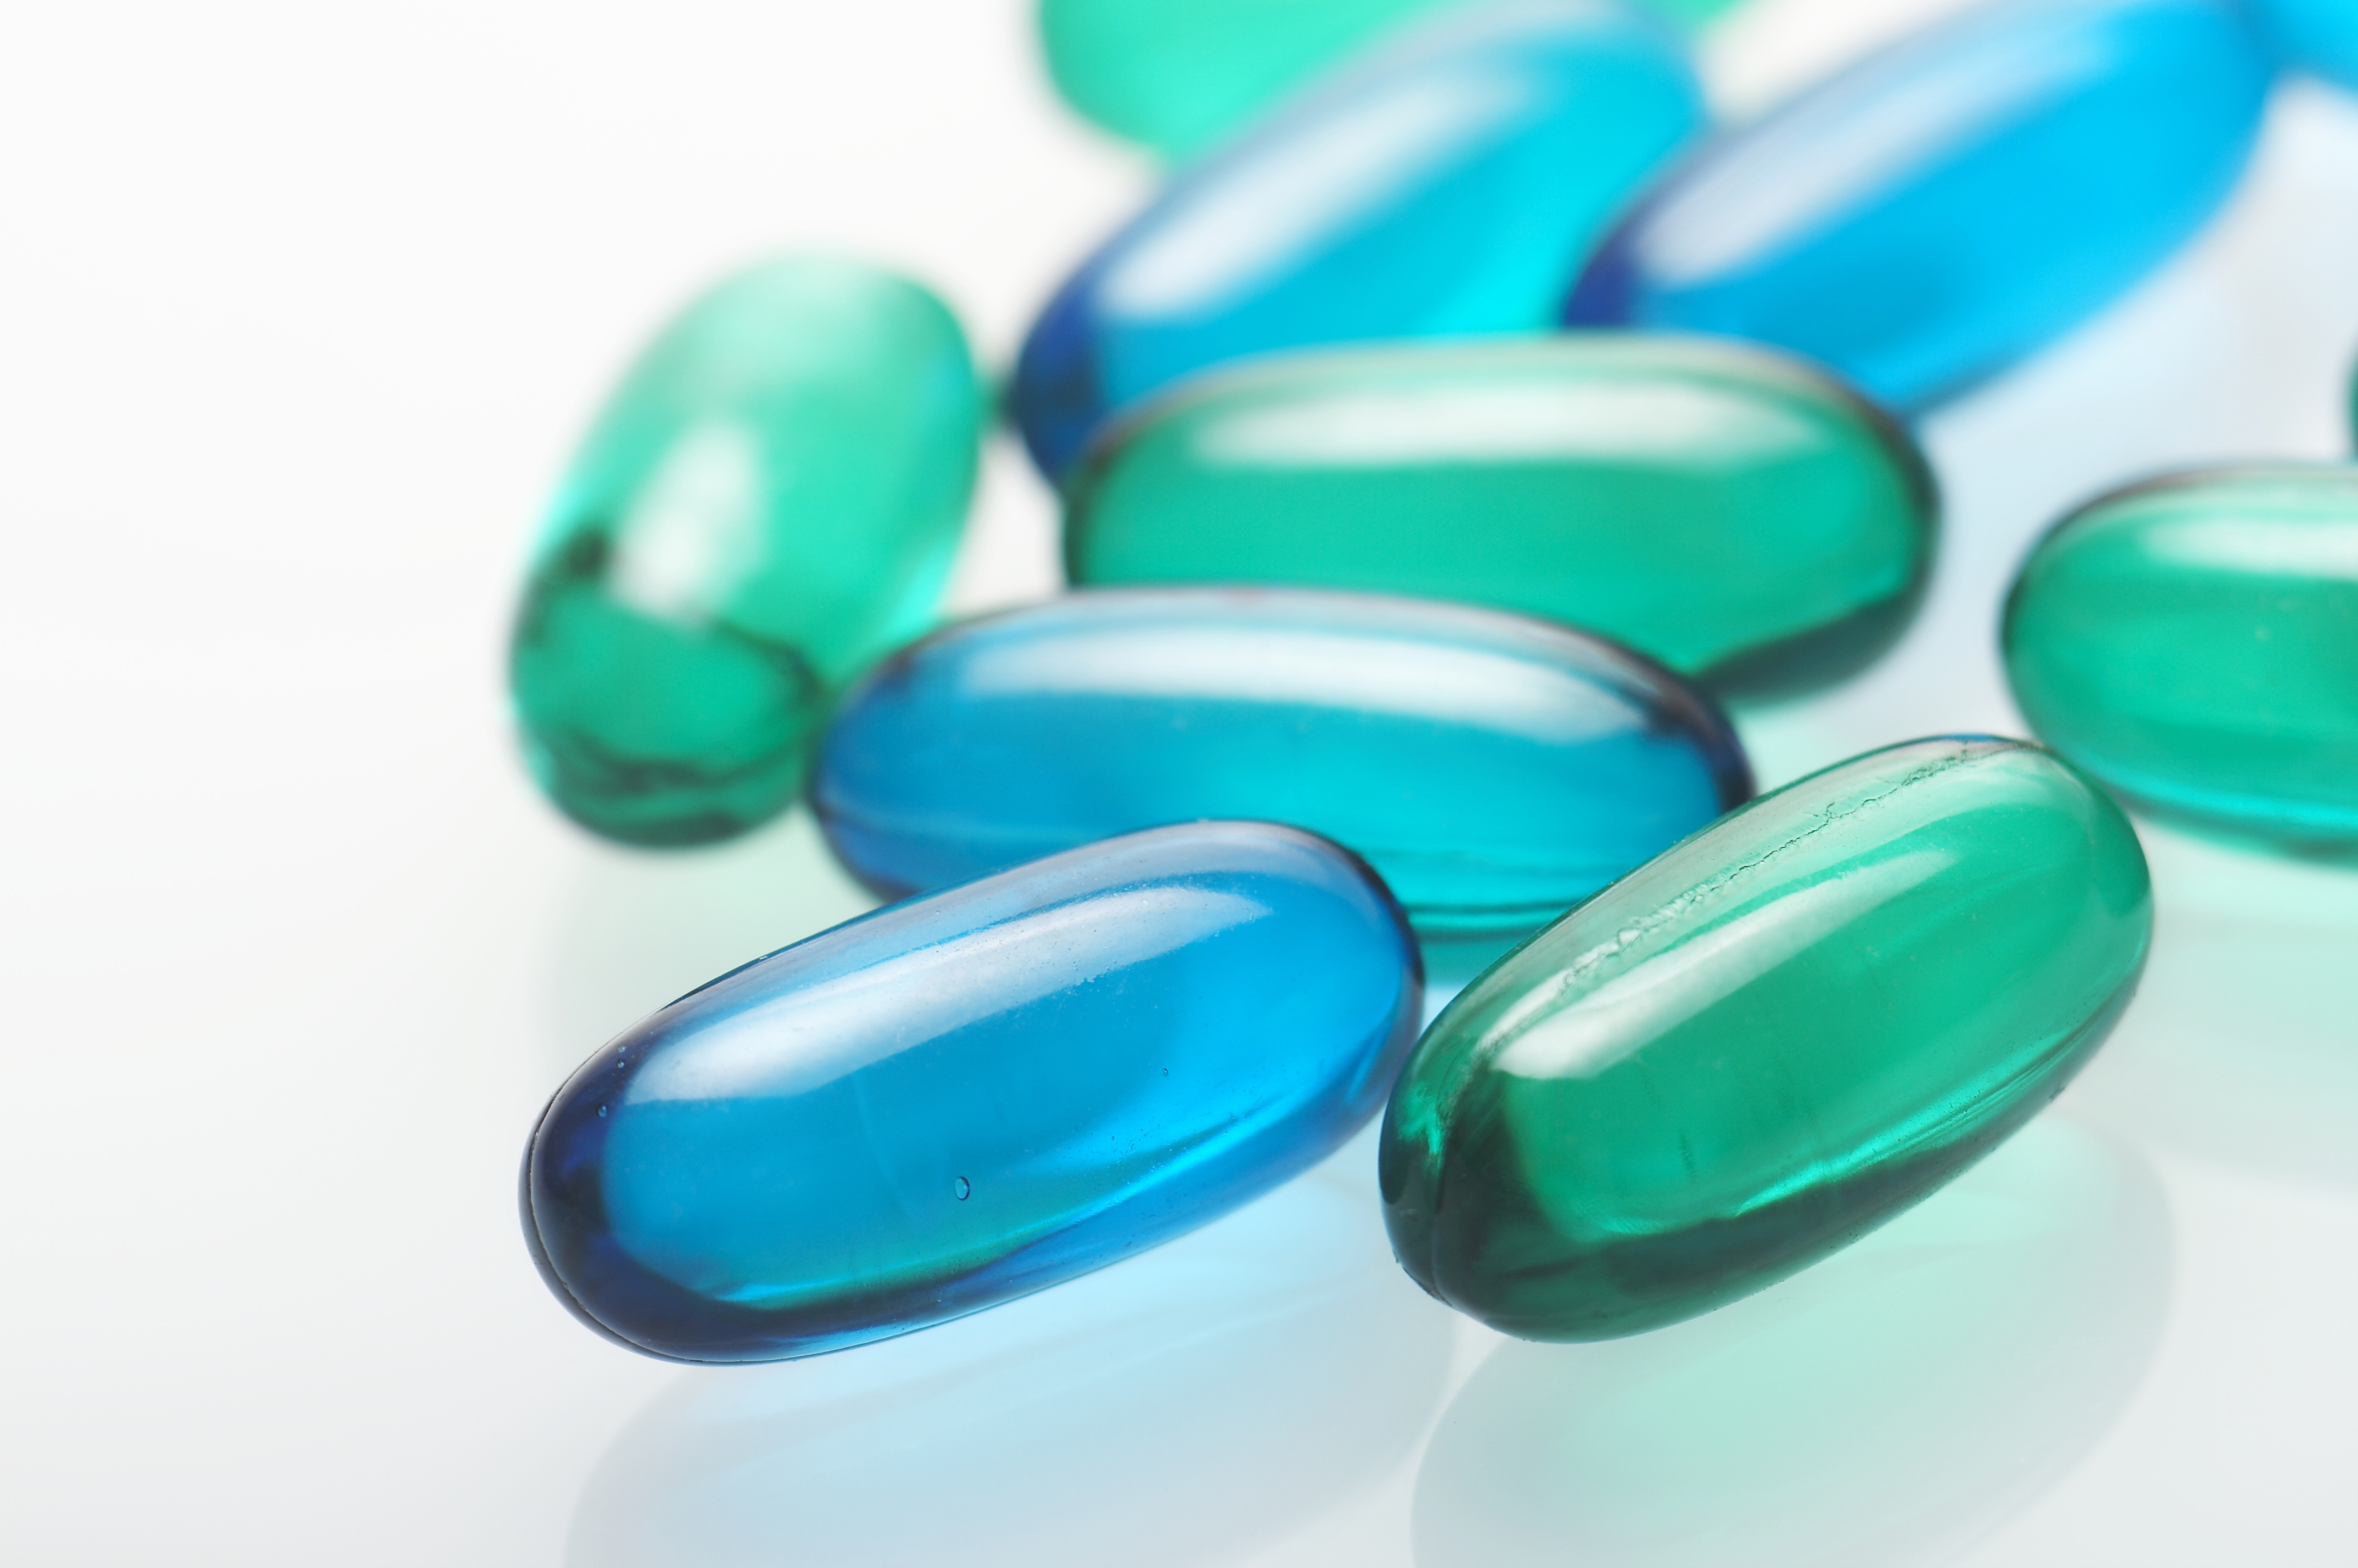 Various pills in blue and green hues.